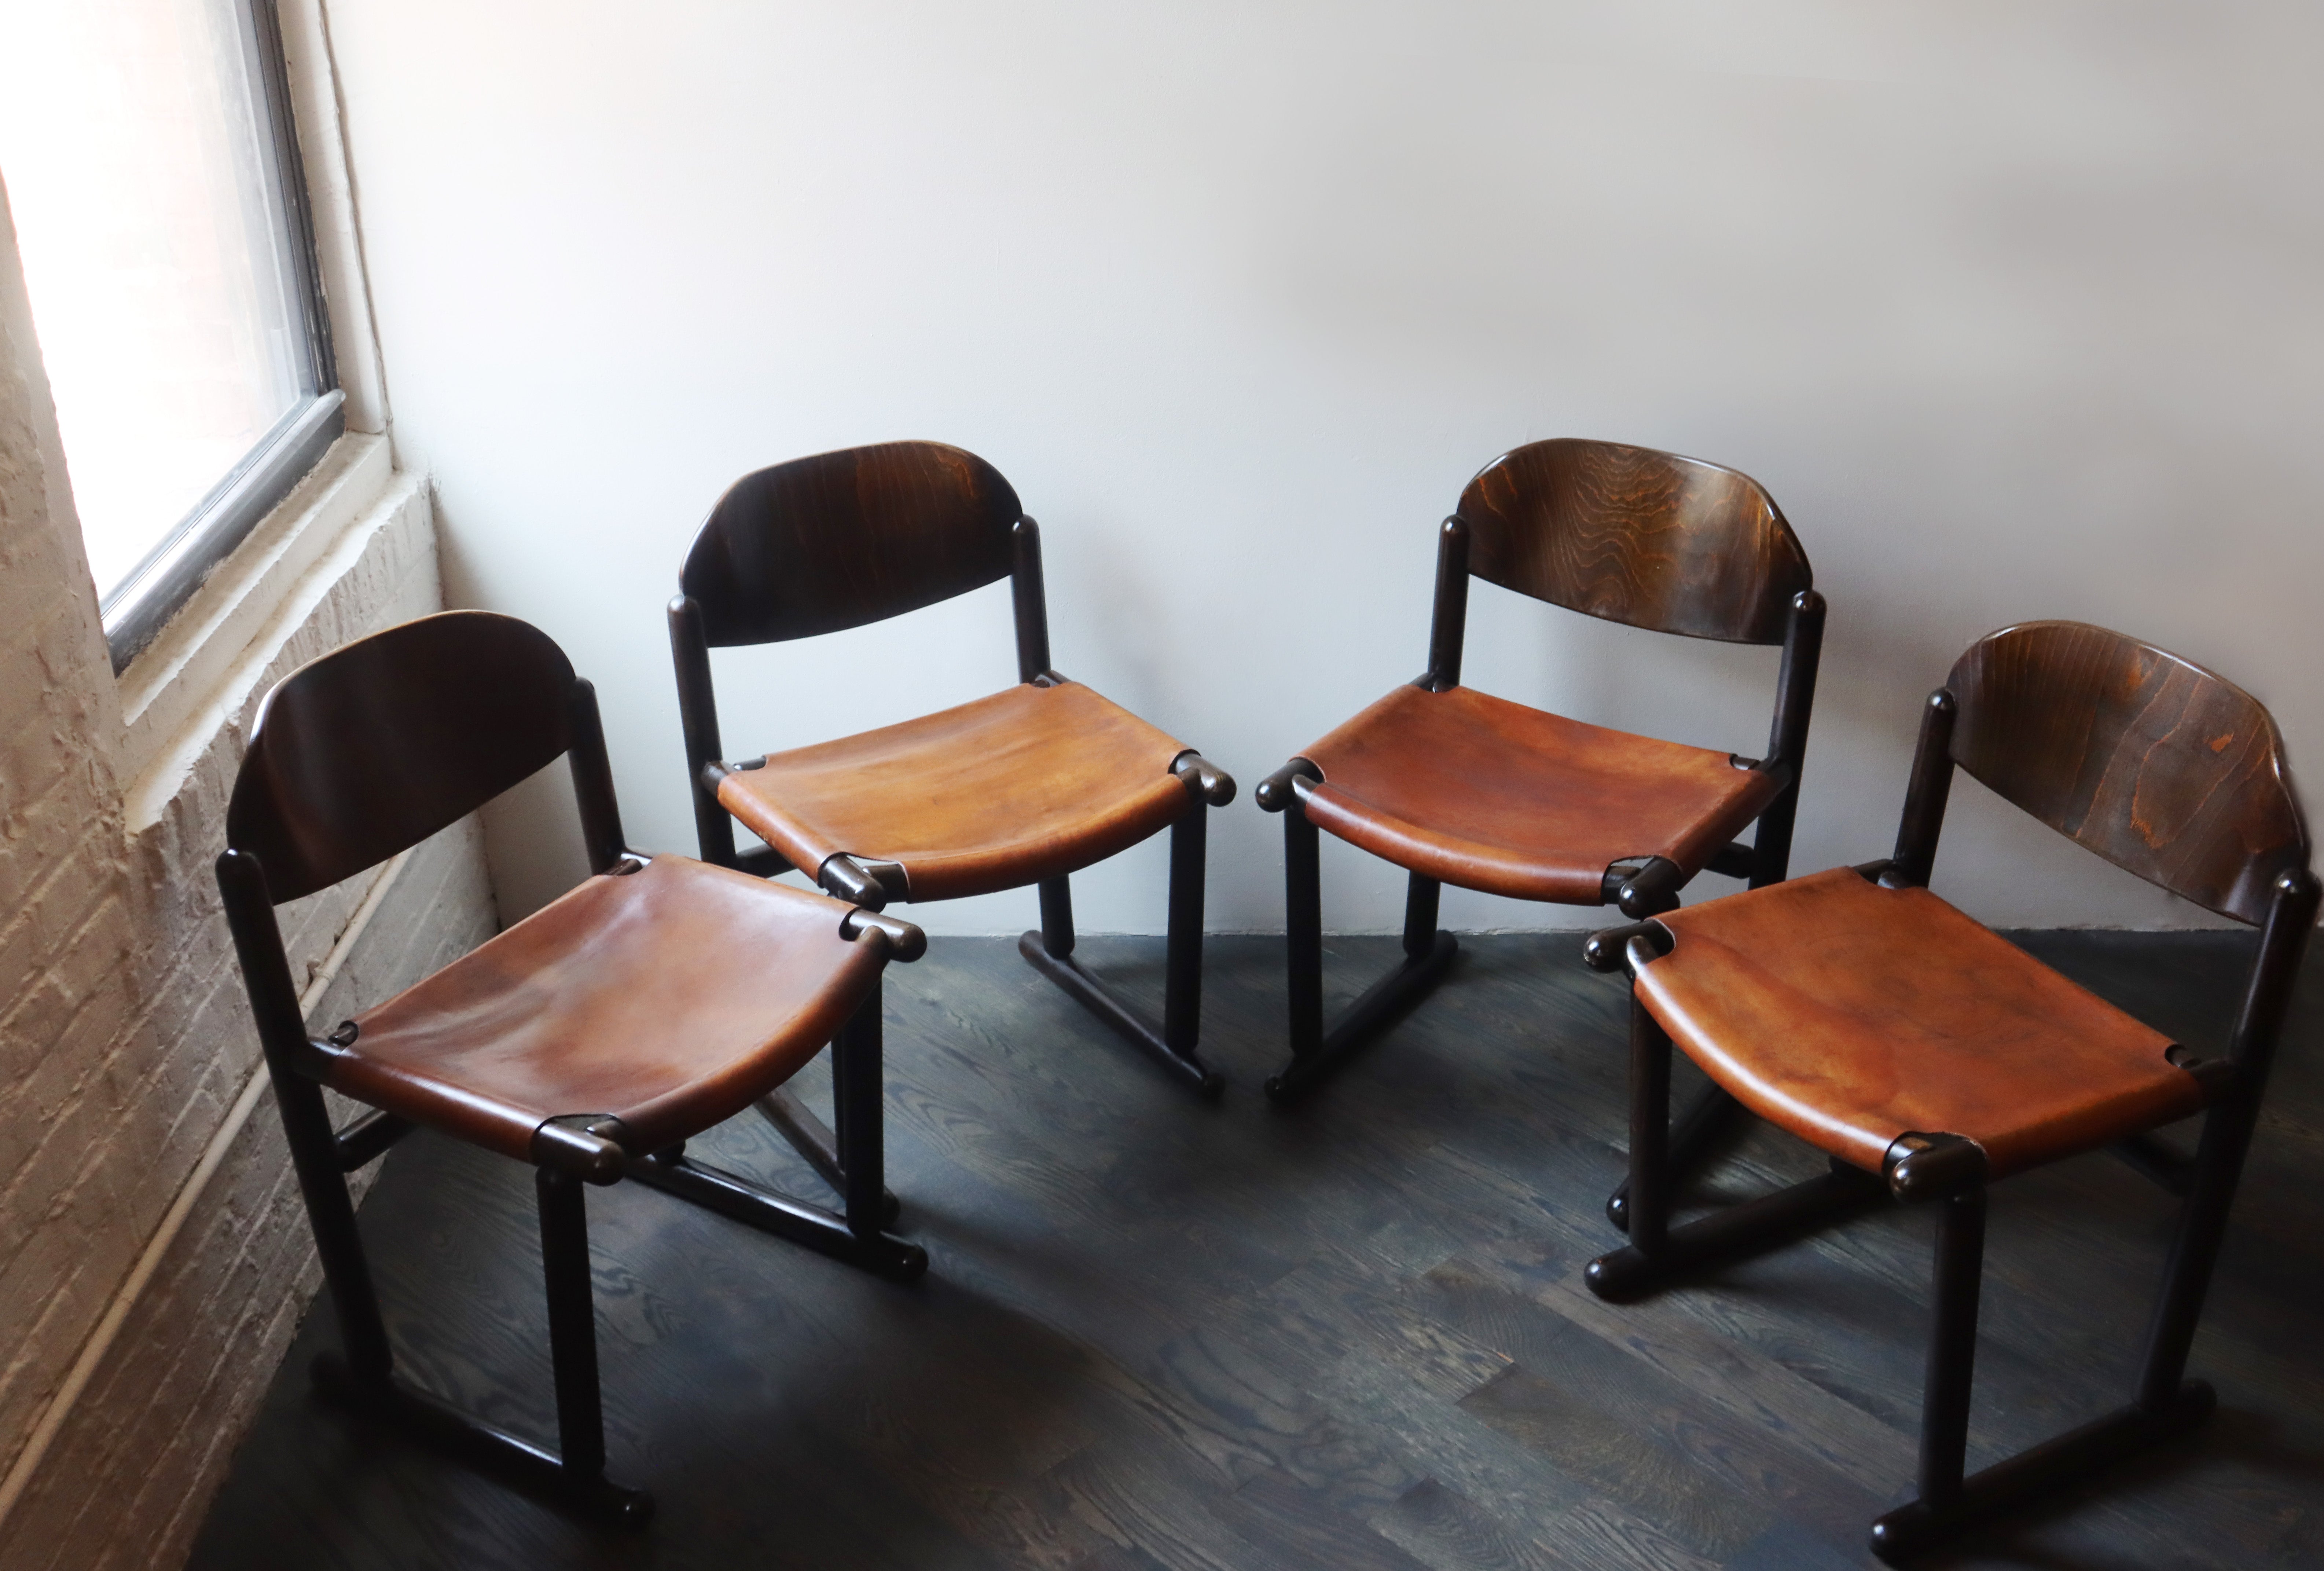 Beautiful set of vintage design chairs. Great brutalist, hunters’ chair style, very solid wooden frame with thick saddle leather seats.

Great condition. Newly Refurbished.

